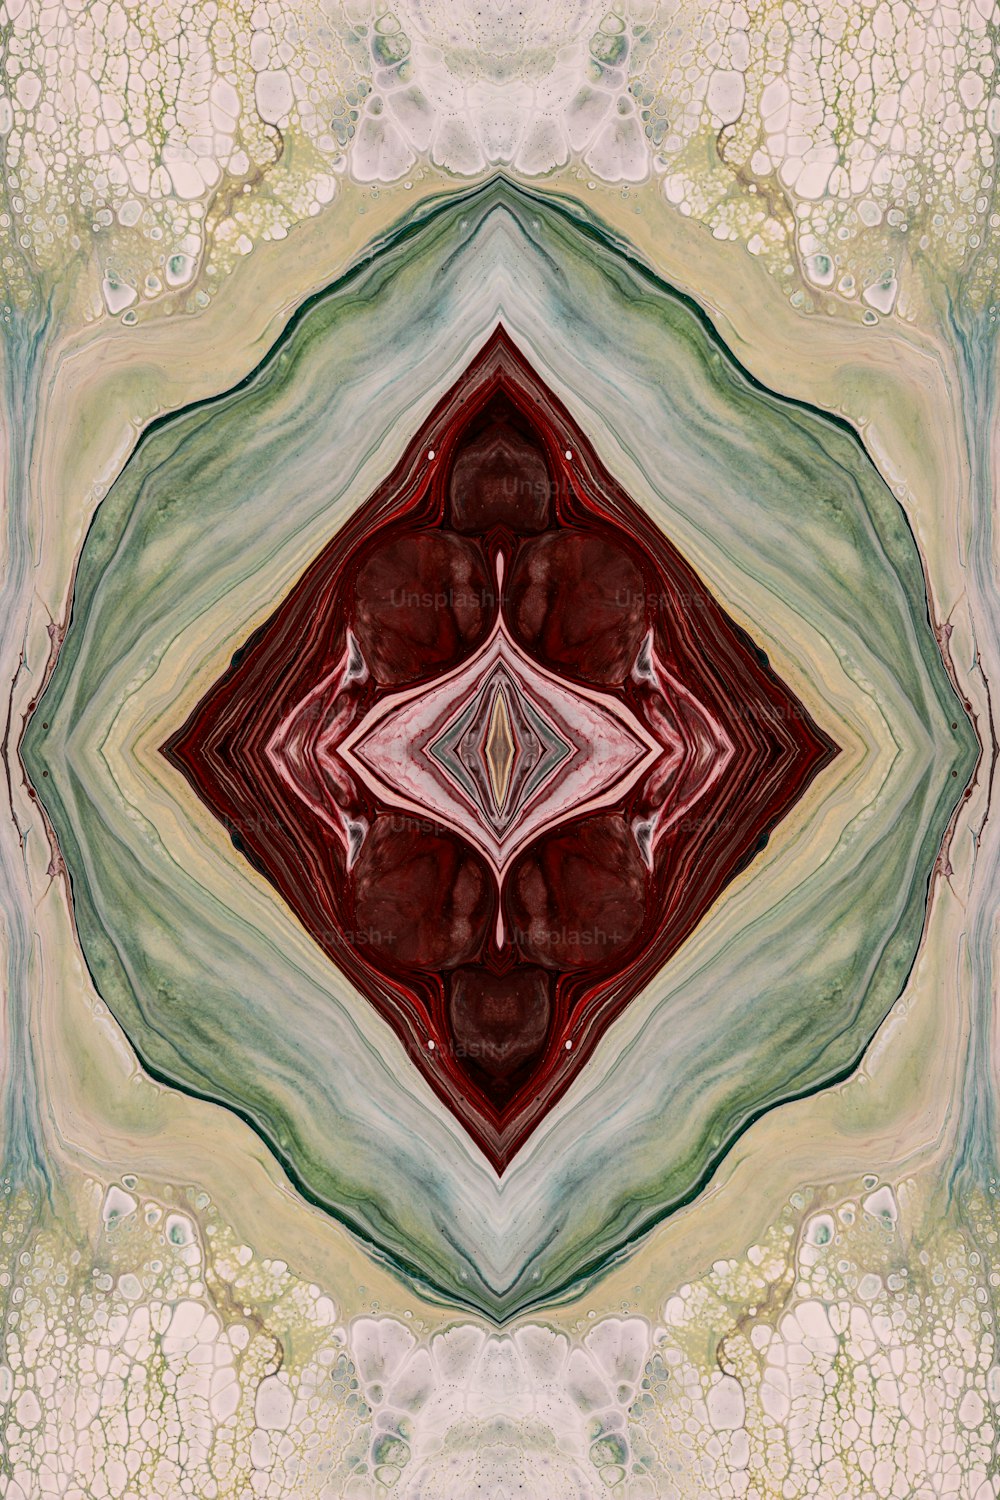 an abstract image of a red, white and green design